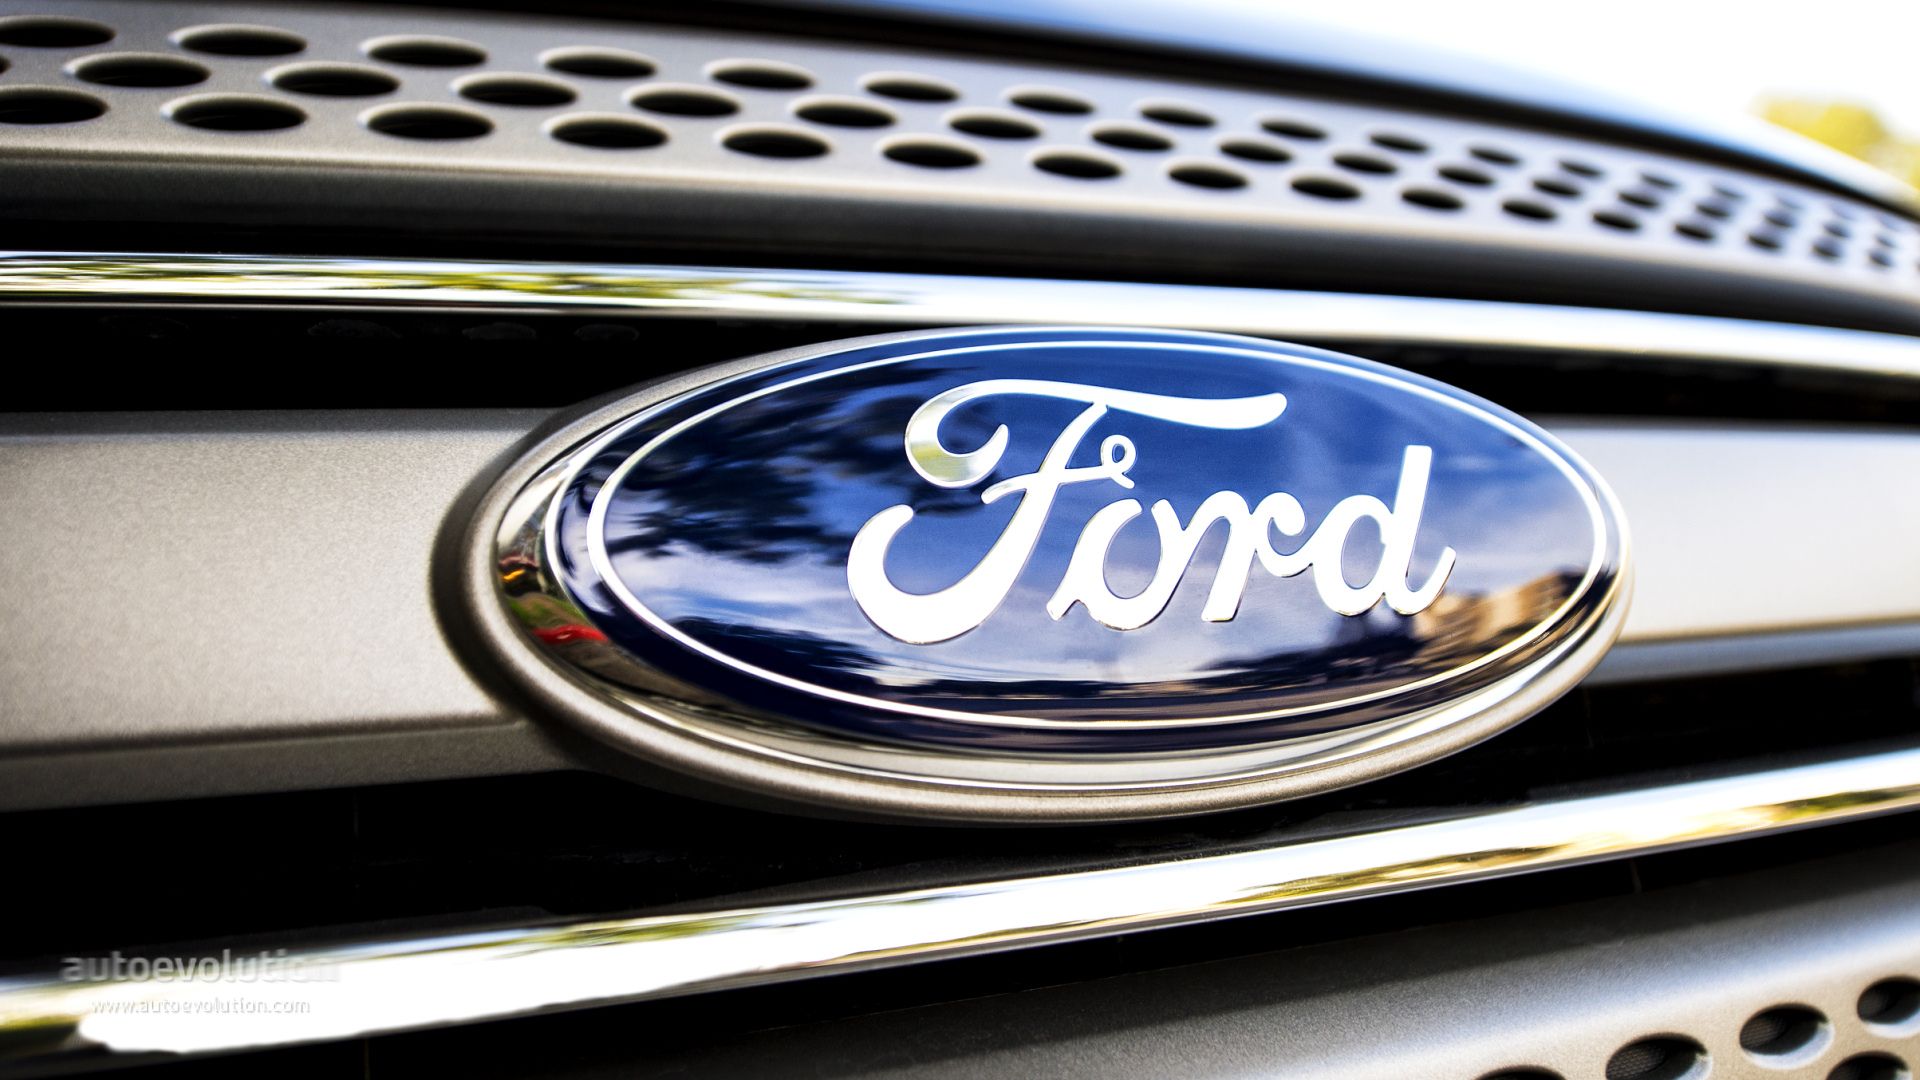 Ford Logo (oldschool) on front grill